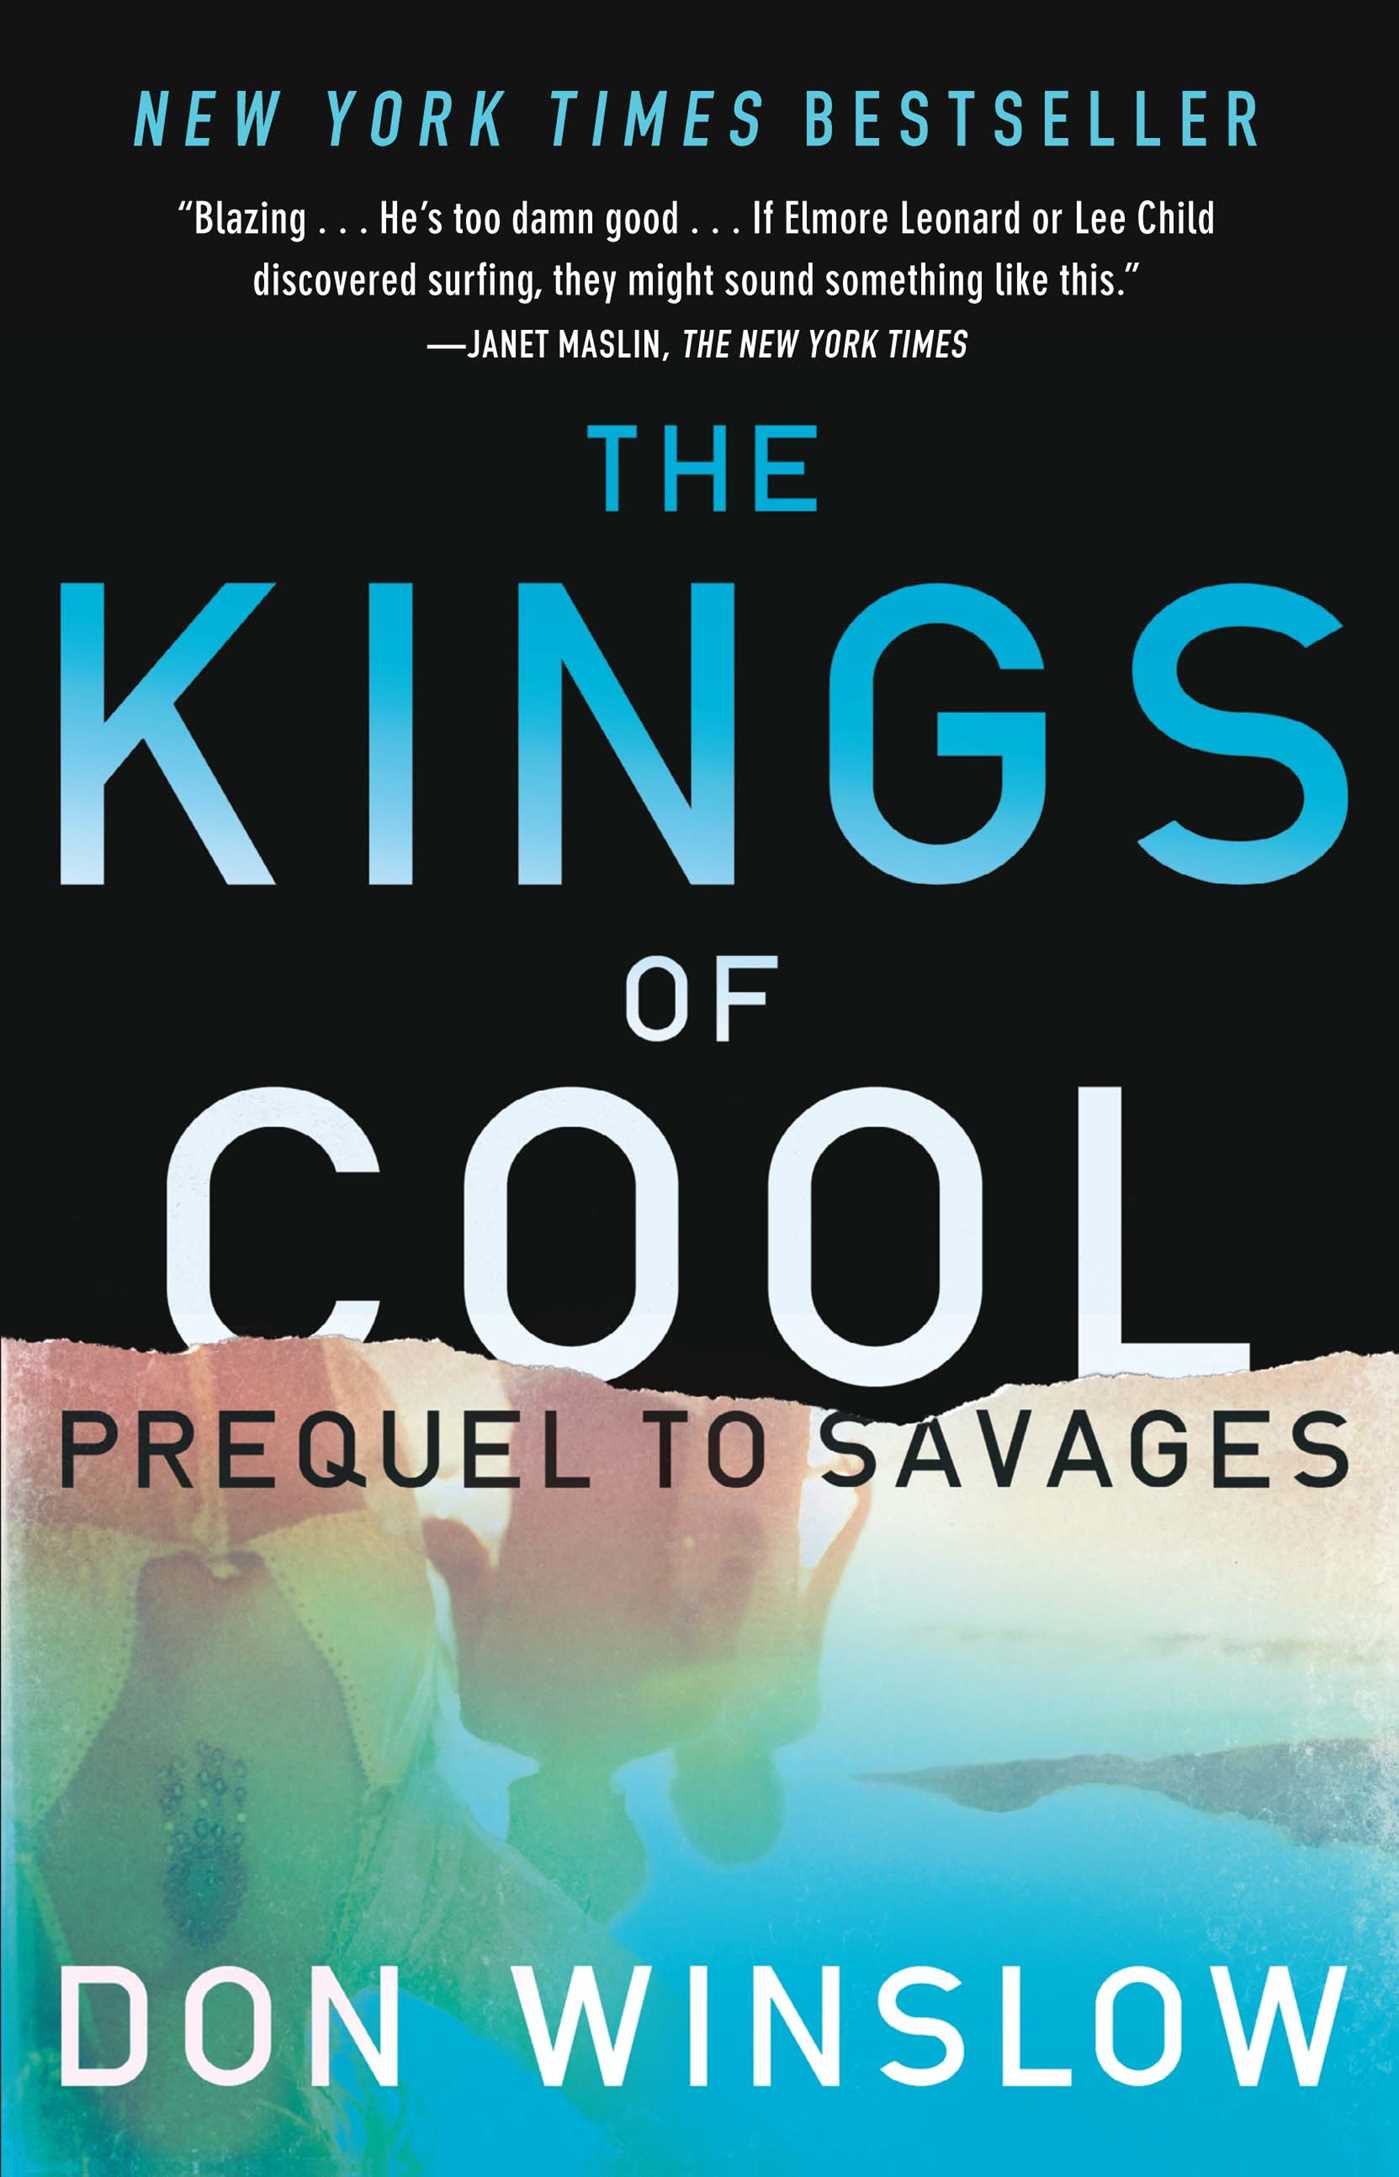 The Kings of Cool : A Prequel to Savages (Paperback) - image 1 of 1